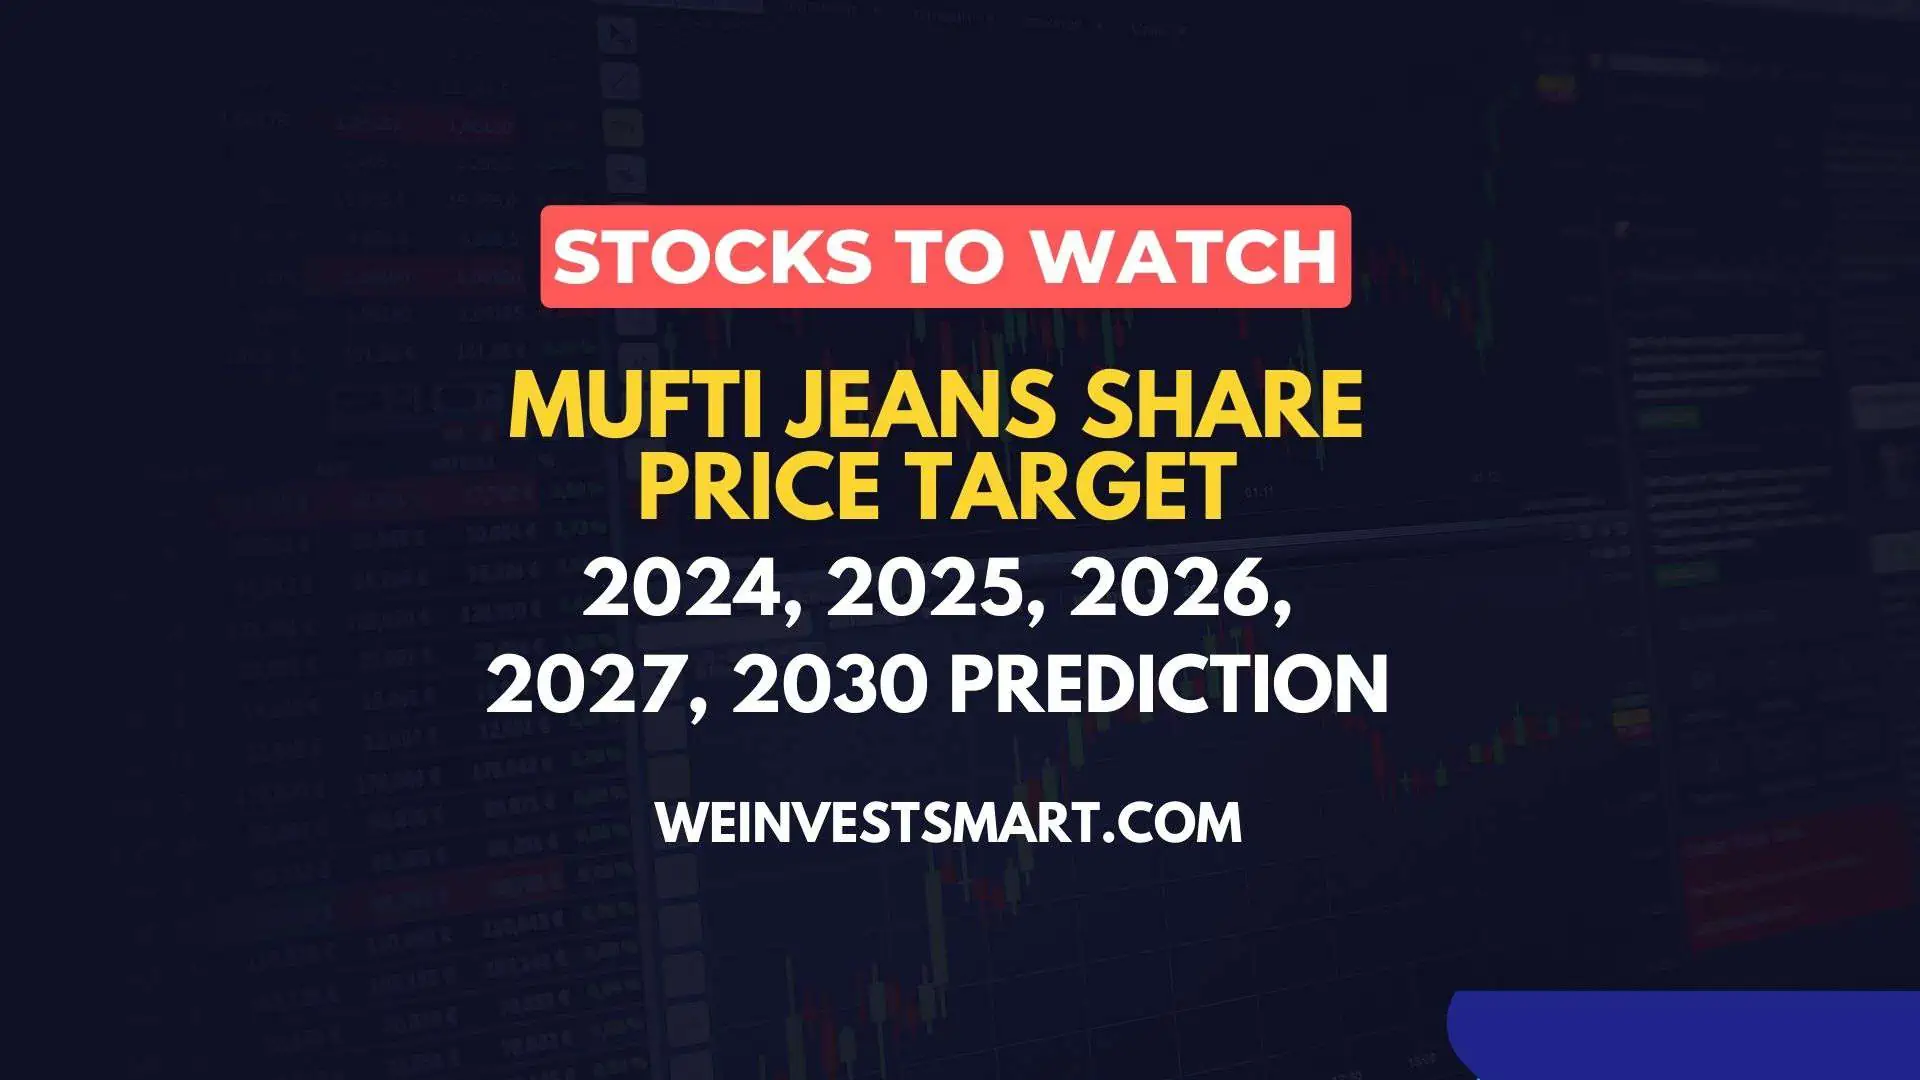 Mufti Jeans share price target 2024, 2025, 2026, 2027, 2030 prediction